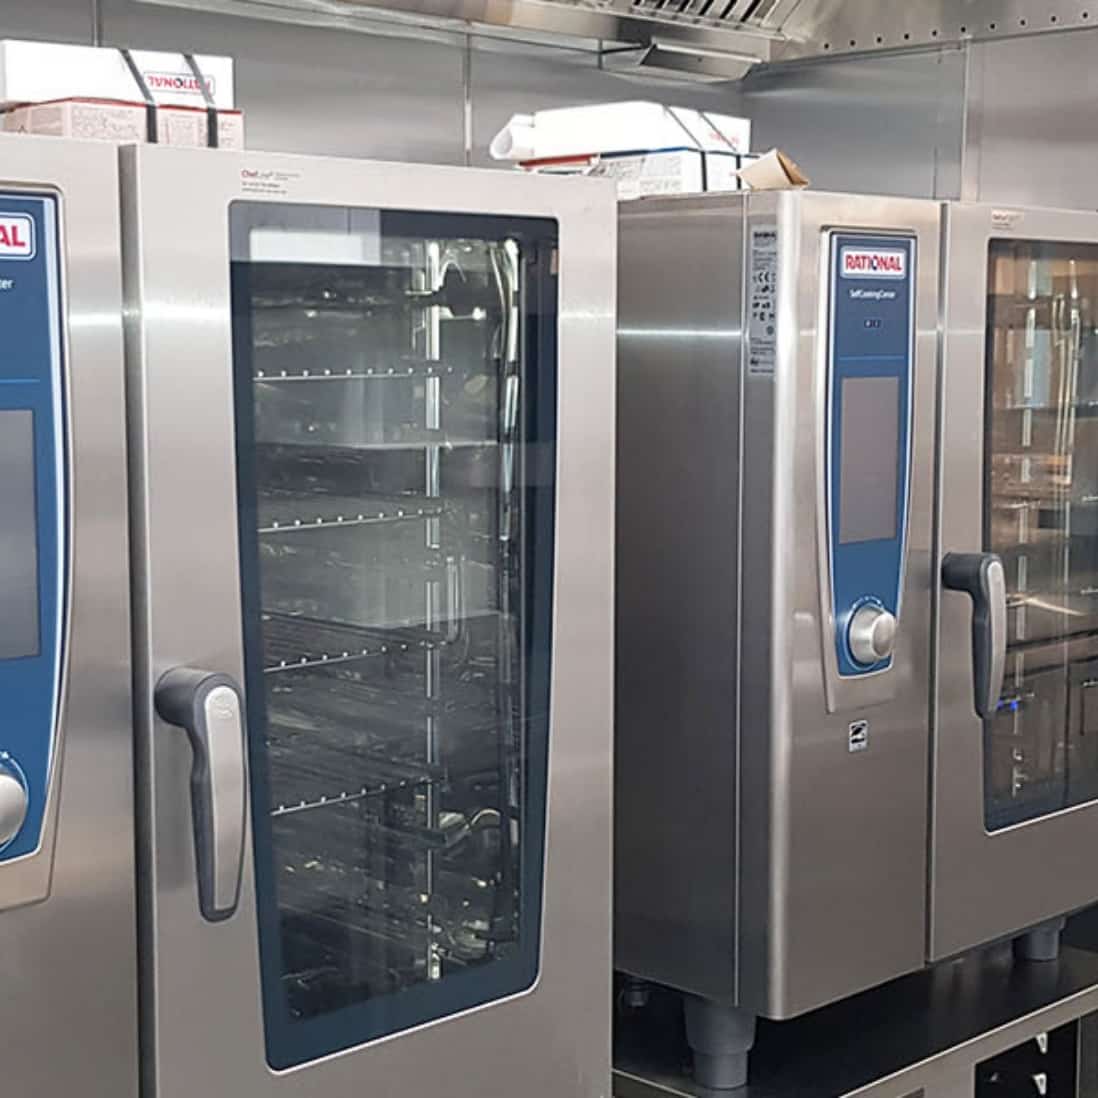 rational combi ovens are essential commercial kitchen equipment